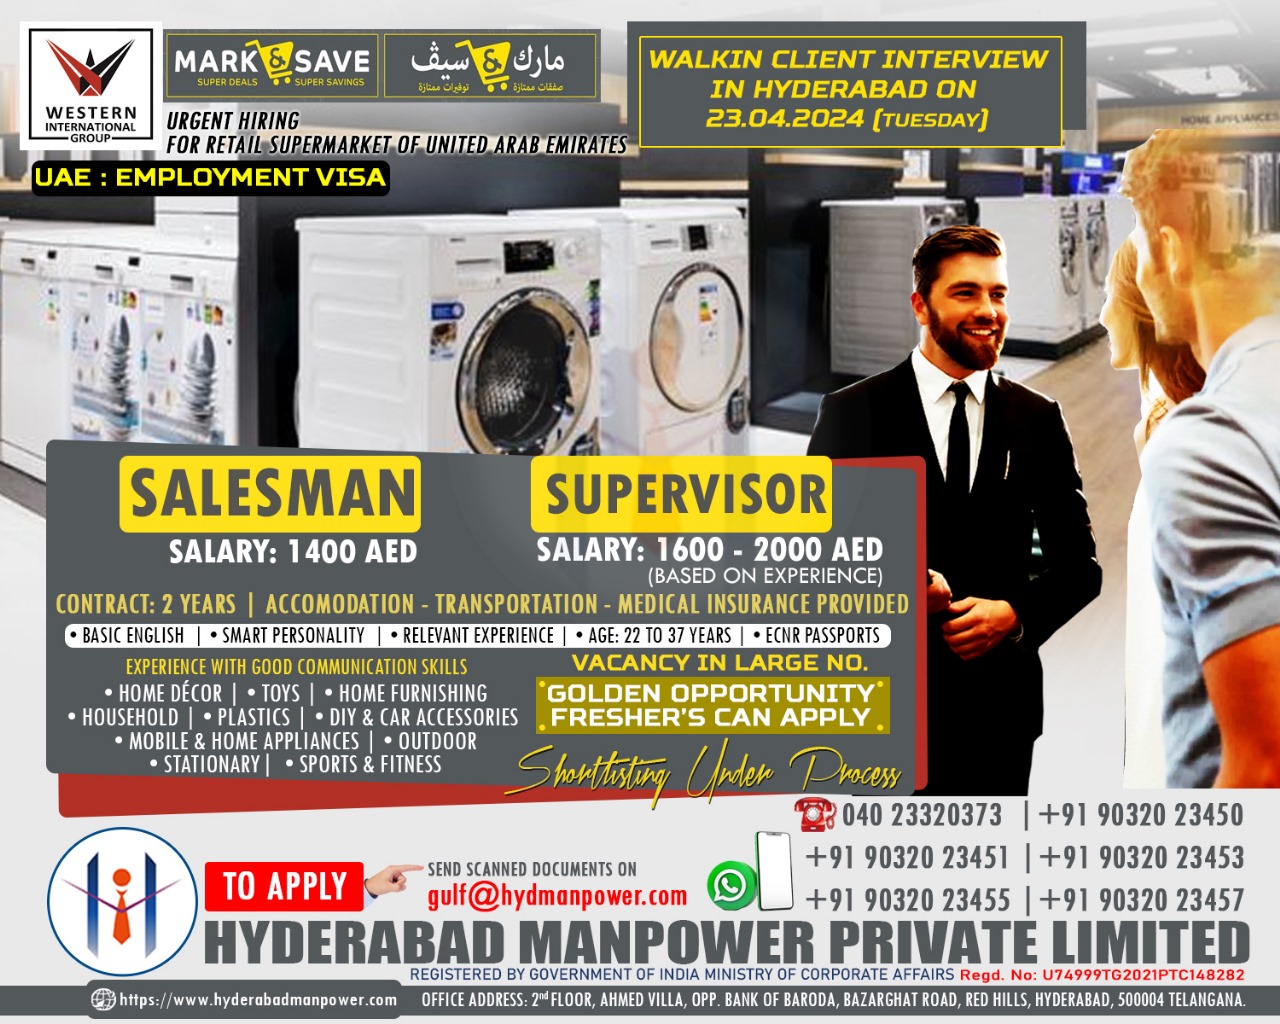 Client Interview in Hyderabad on 23rd April 2024